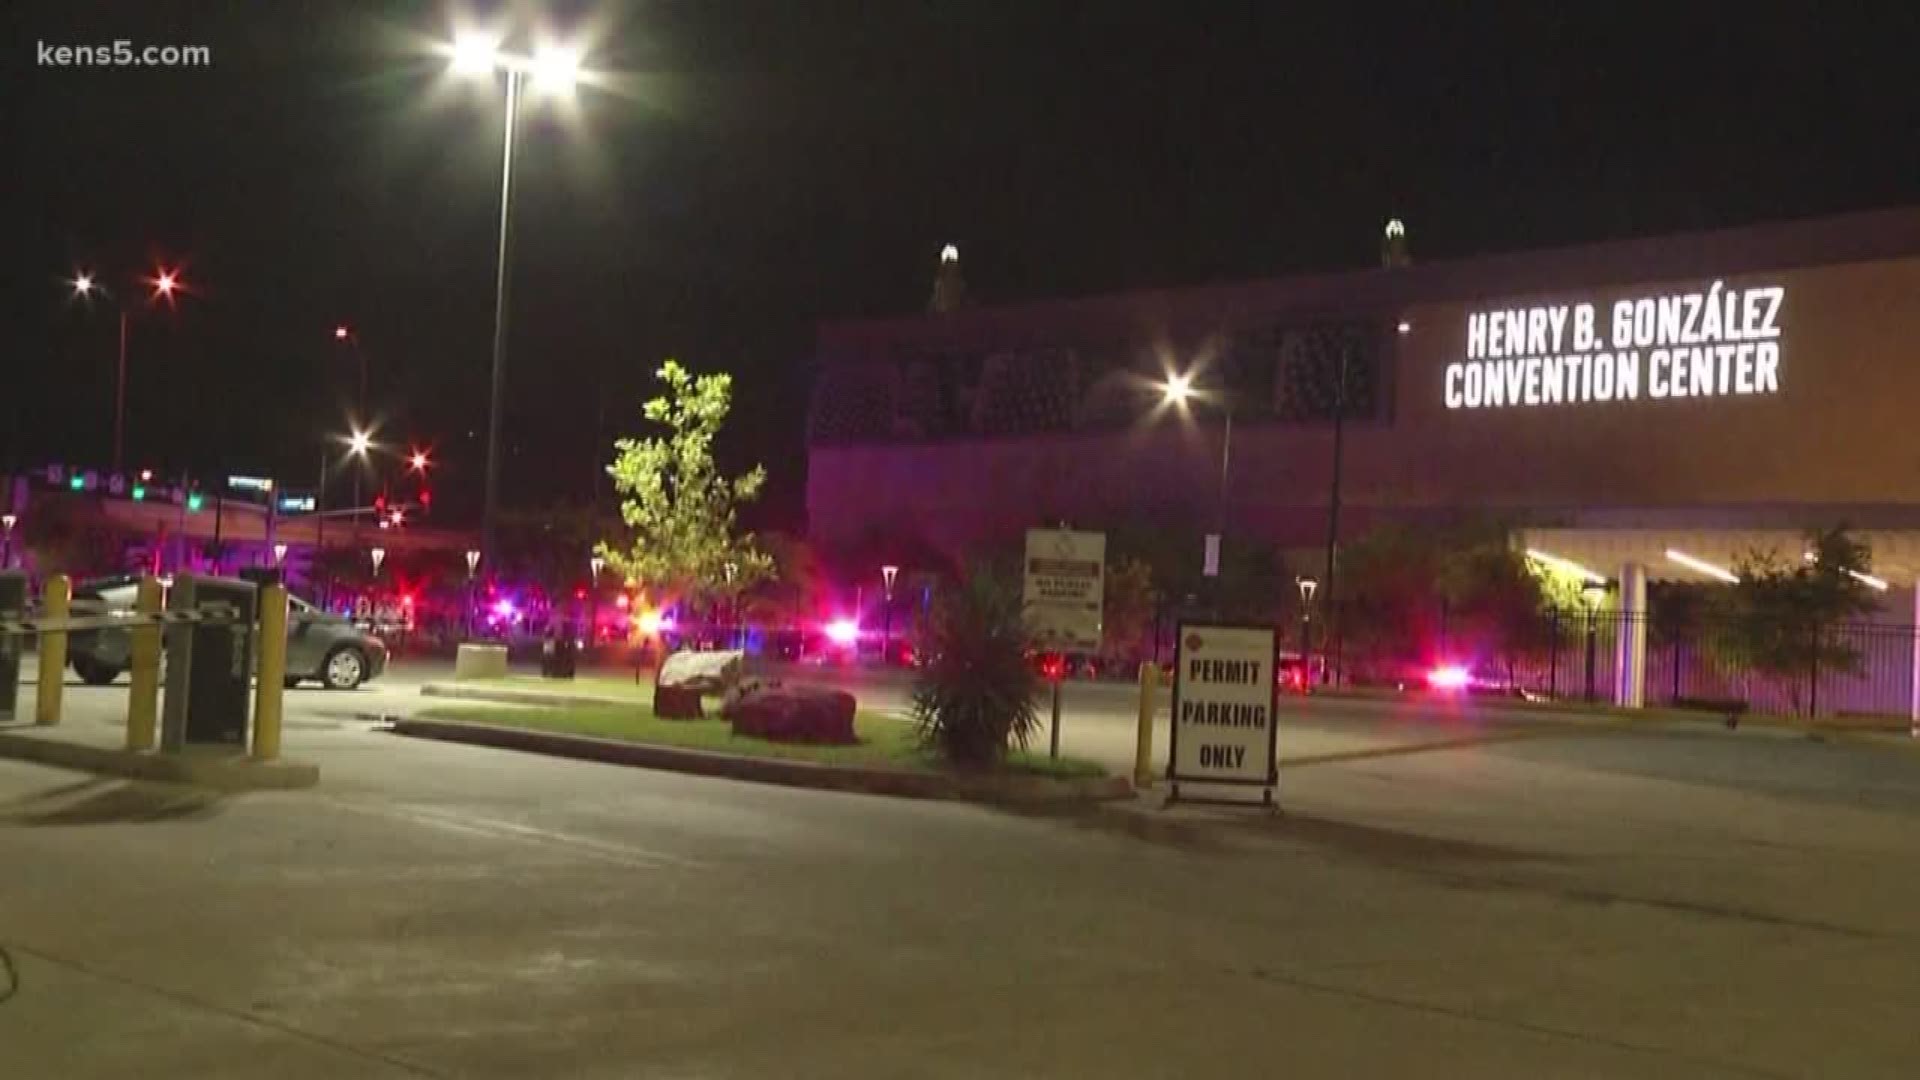 A suspect is at large after a shooting that left four people injured after an argument. The shooting happened Monday night near the Grand Hyatt hotel, a popular location downtown where many are staying for a firefighter convention this week.